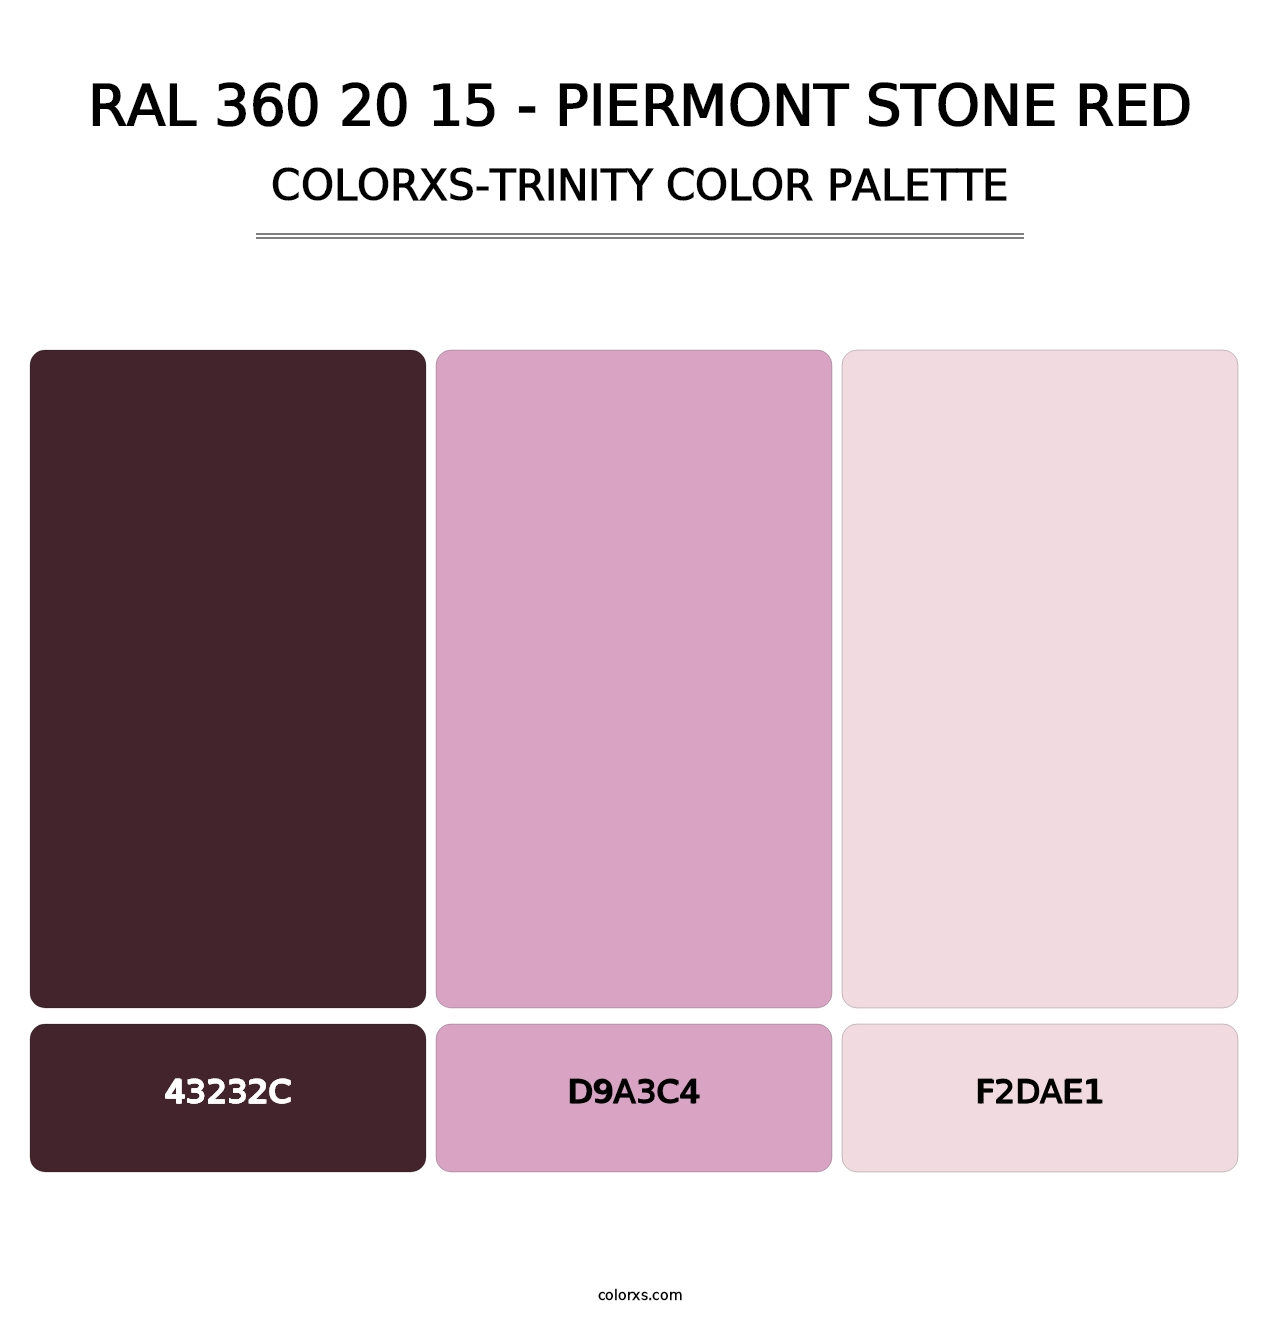 RAL 360 20 15 - Piermont Stone Red - Colorxs Trinity Palette